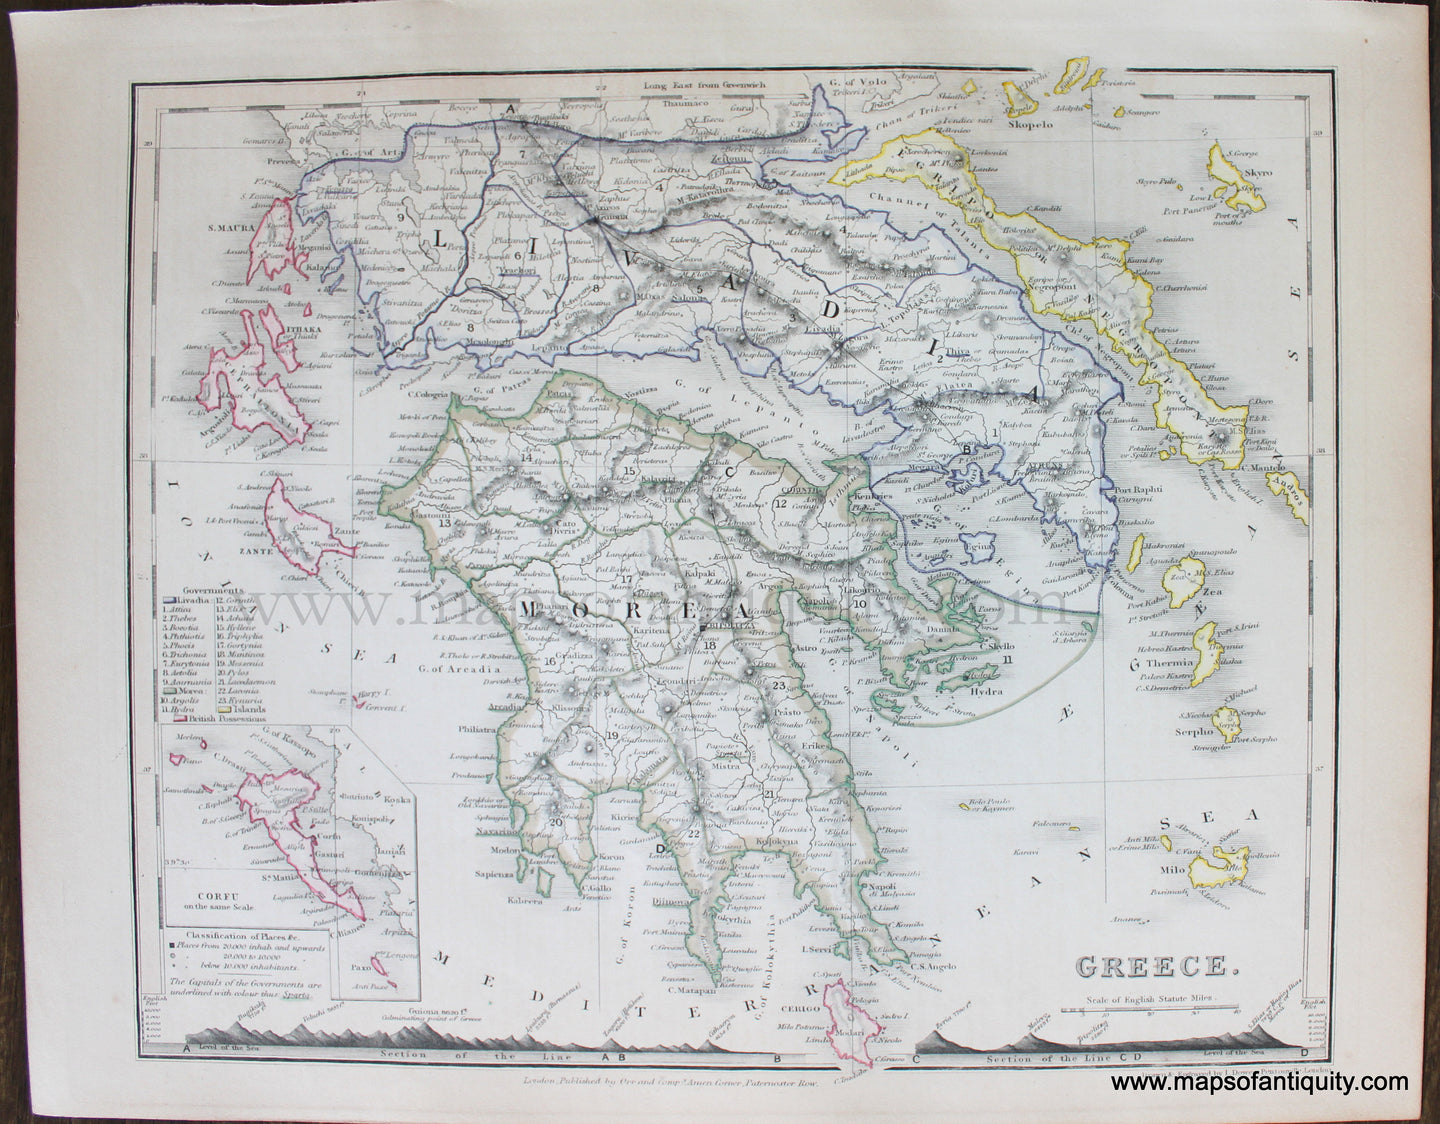 Genuine-Antique-Map-Greece-Europe--1850-Petermann-/-Orr-/-Dower-Maps-Of-Antiquity-1800s-19th-century